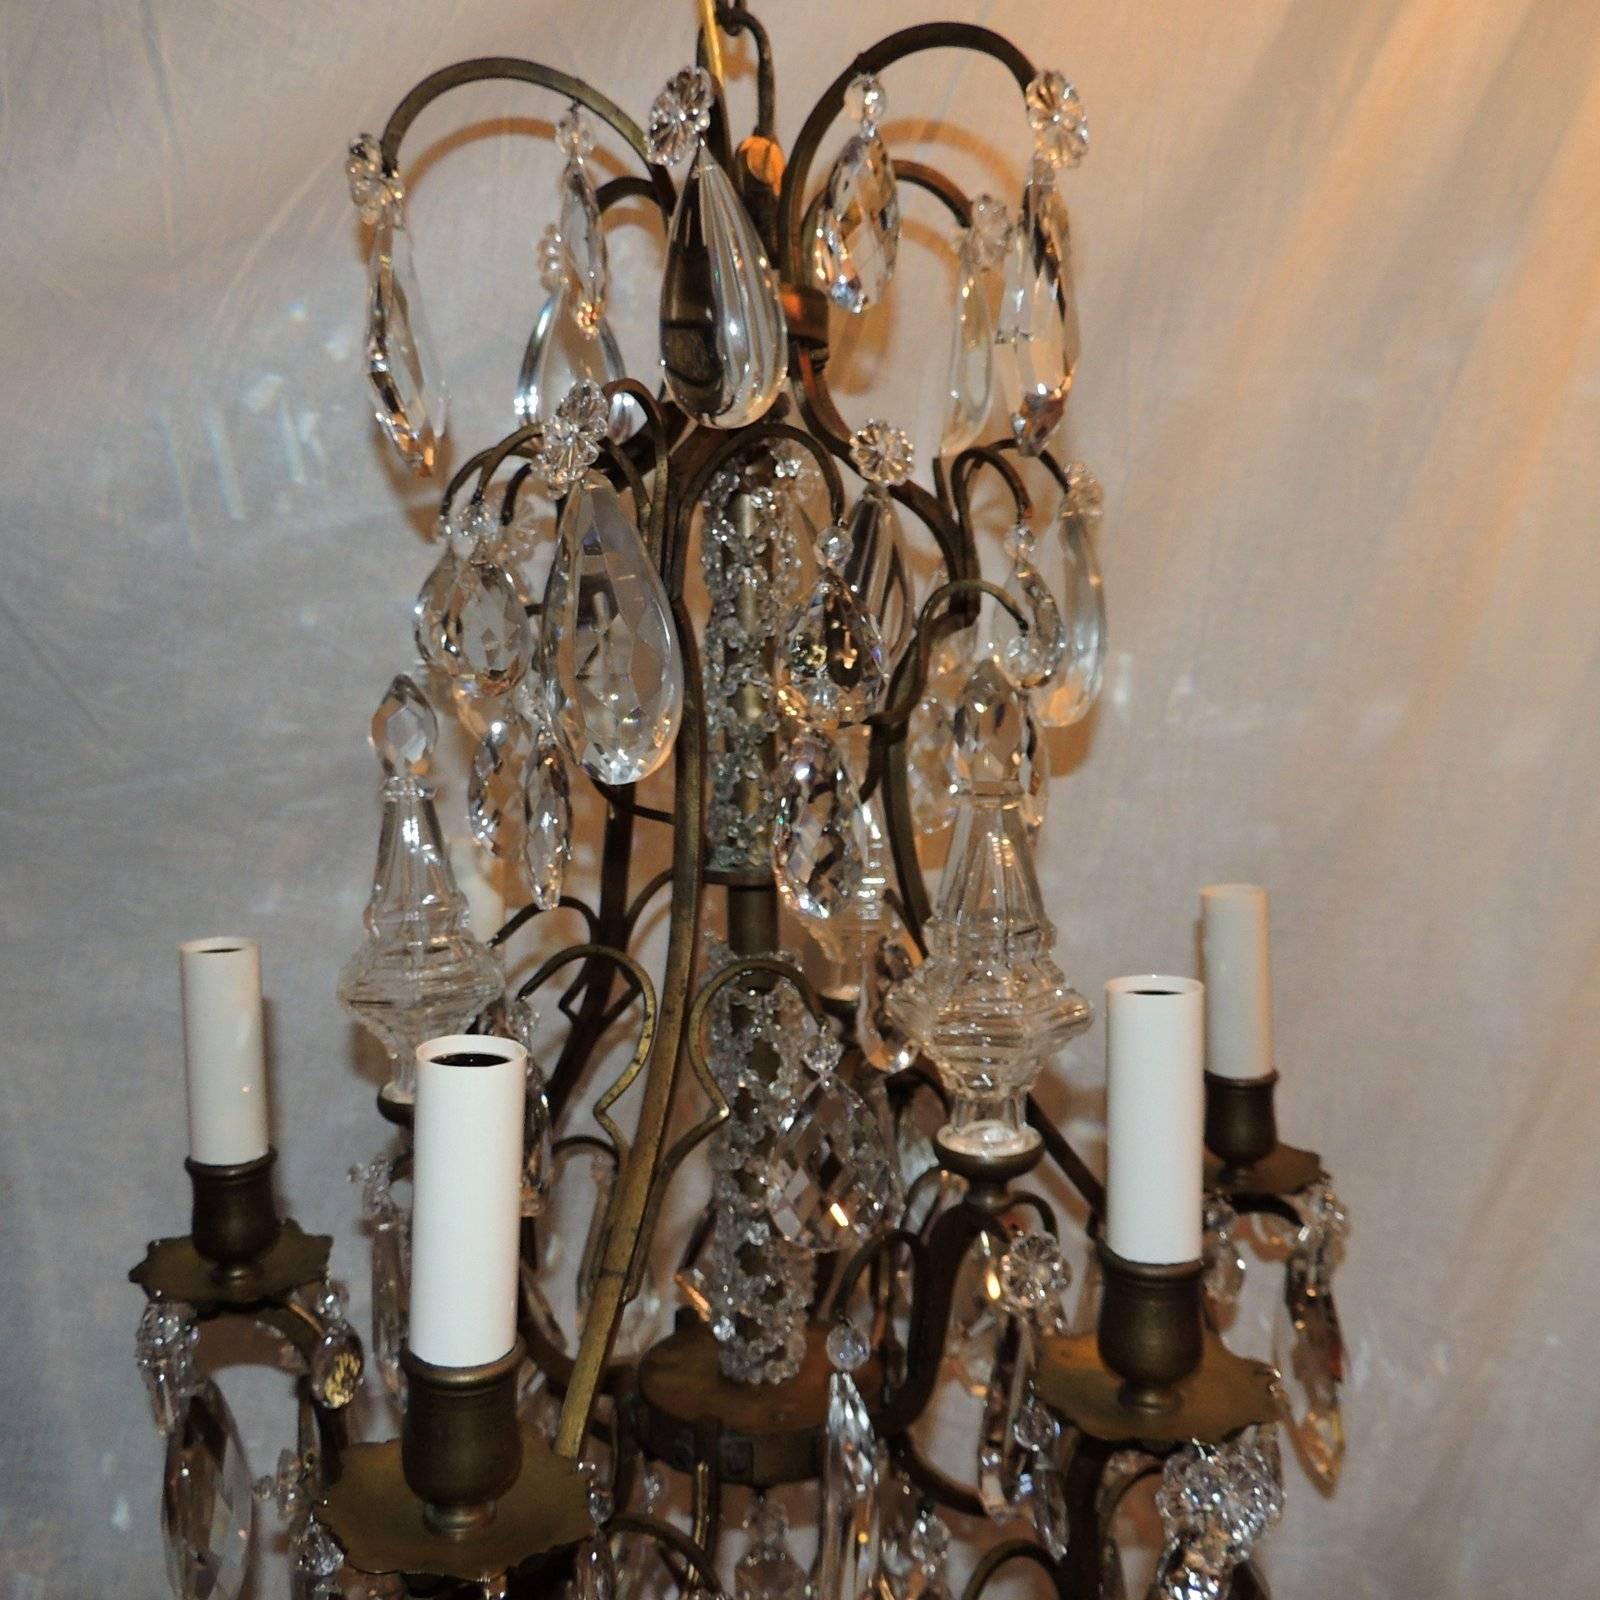 Faceted Wonderful French Patina Bronze Crystal Six Arm Beaded Obelisk Chandelier Fixture